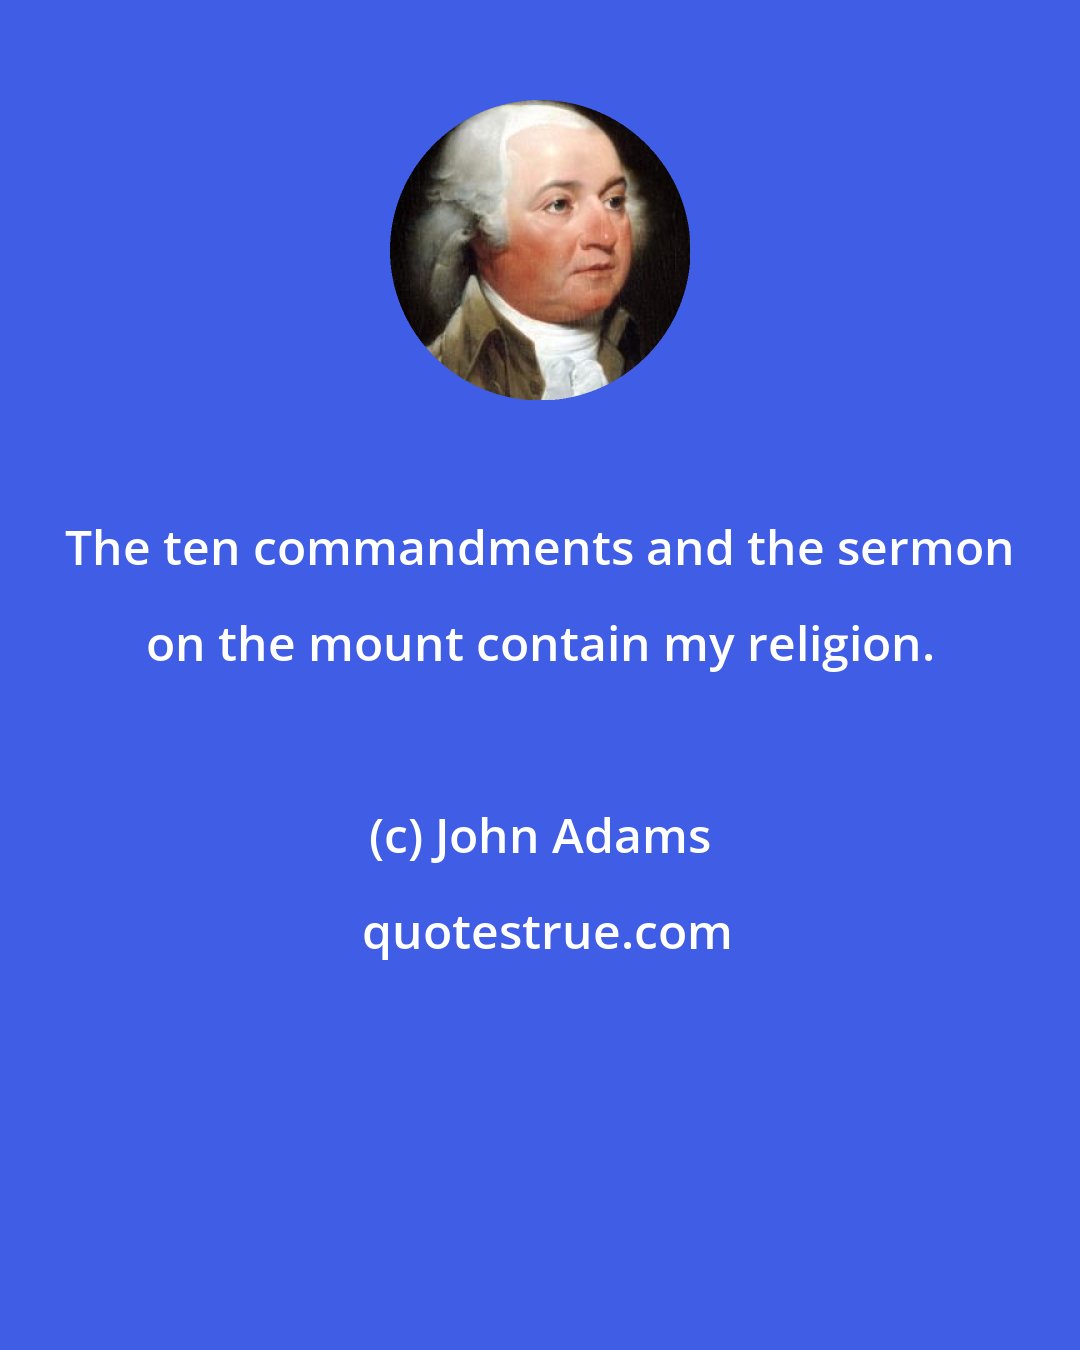 John Adams: The ten commandments and the sermon on the mount contain my religion.